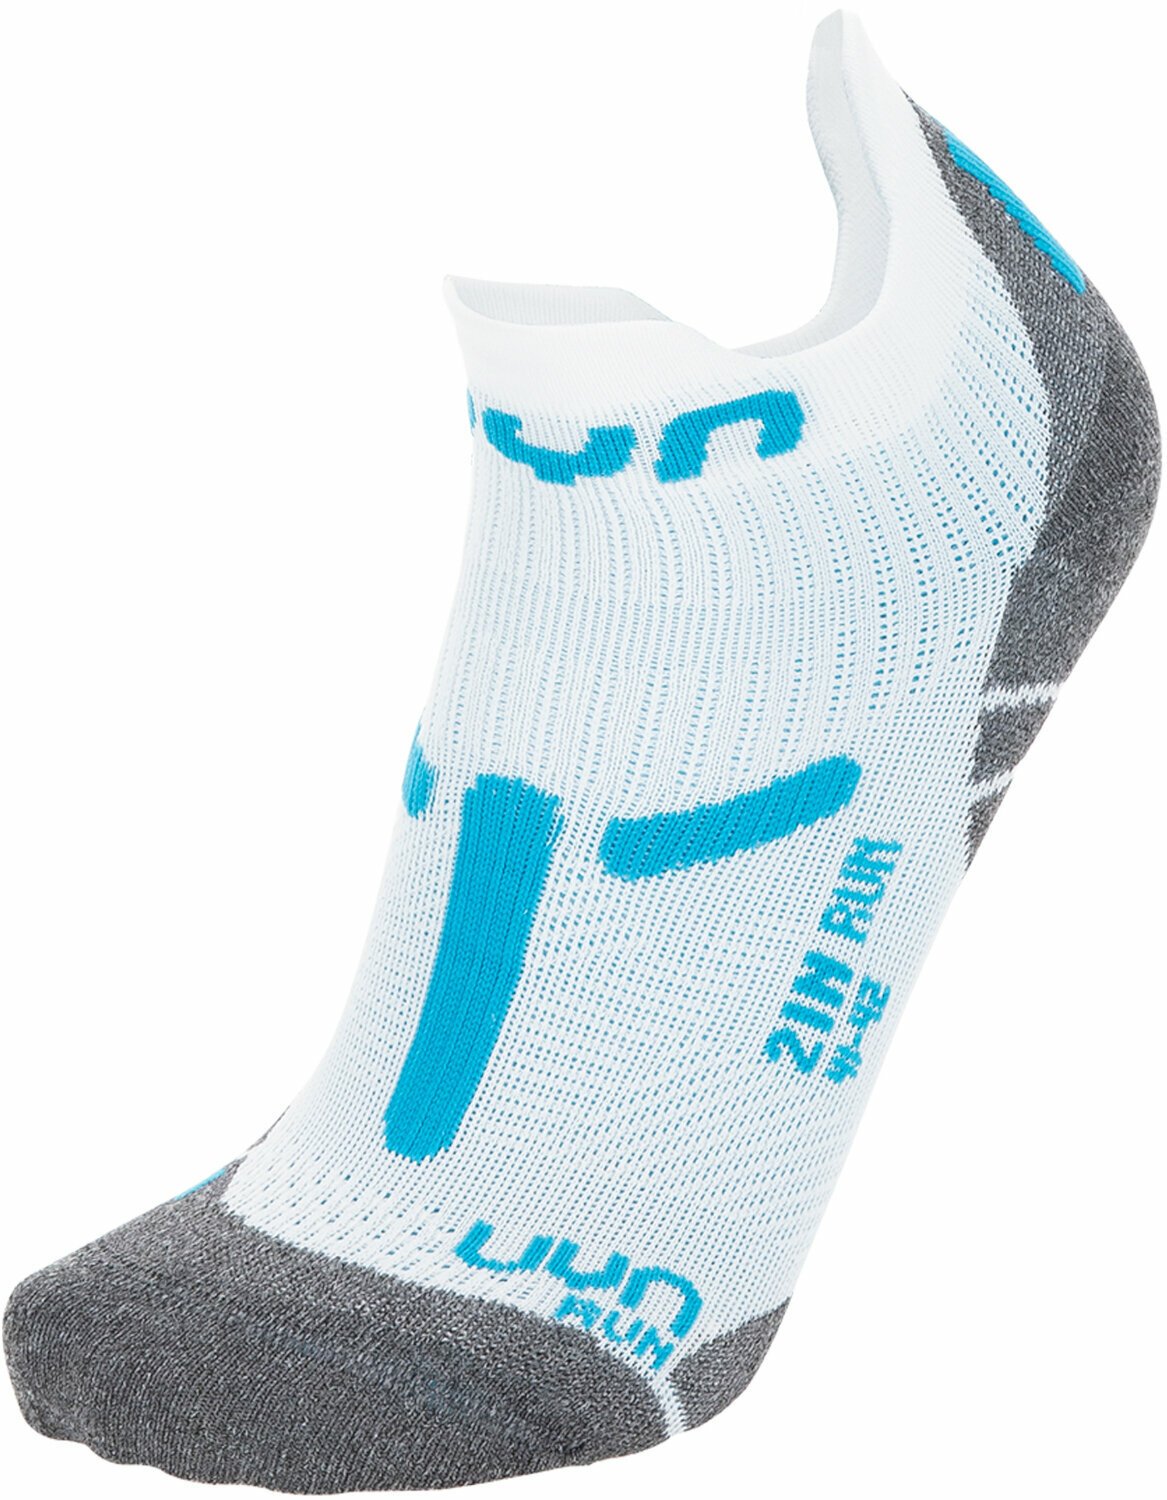 Chaussettes de course
 UYN Run 2in Turquoise-Blanc 35/36 Chaussettes de course